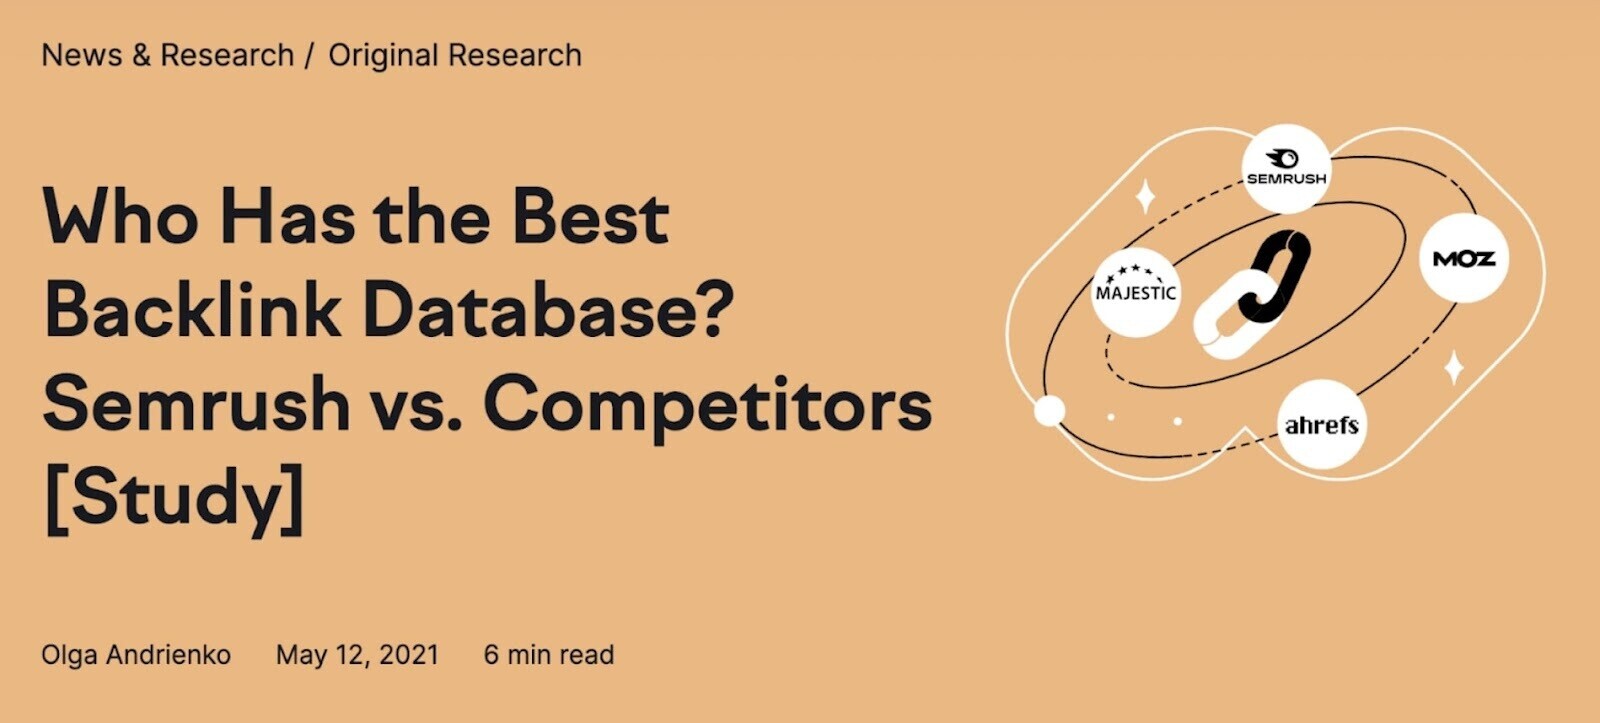 "Who Has the Best Backlink Database? Semrush vs. Competitors [Study]" blog title